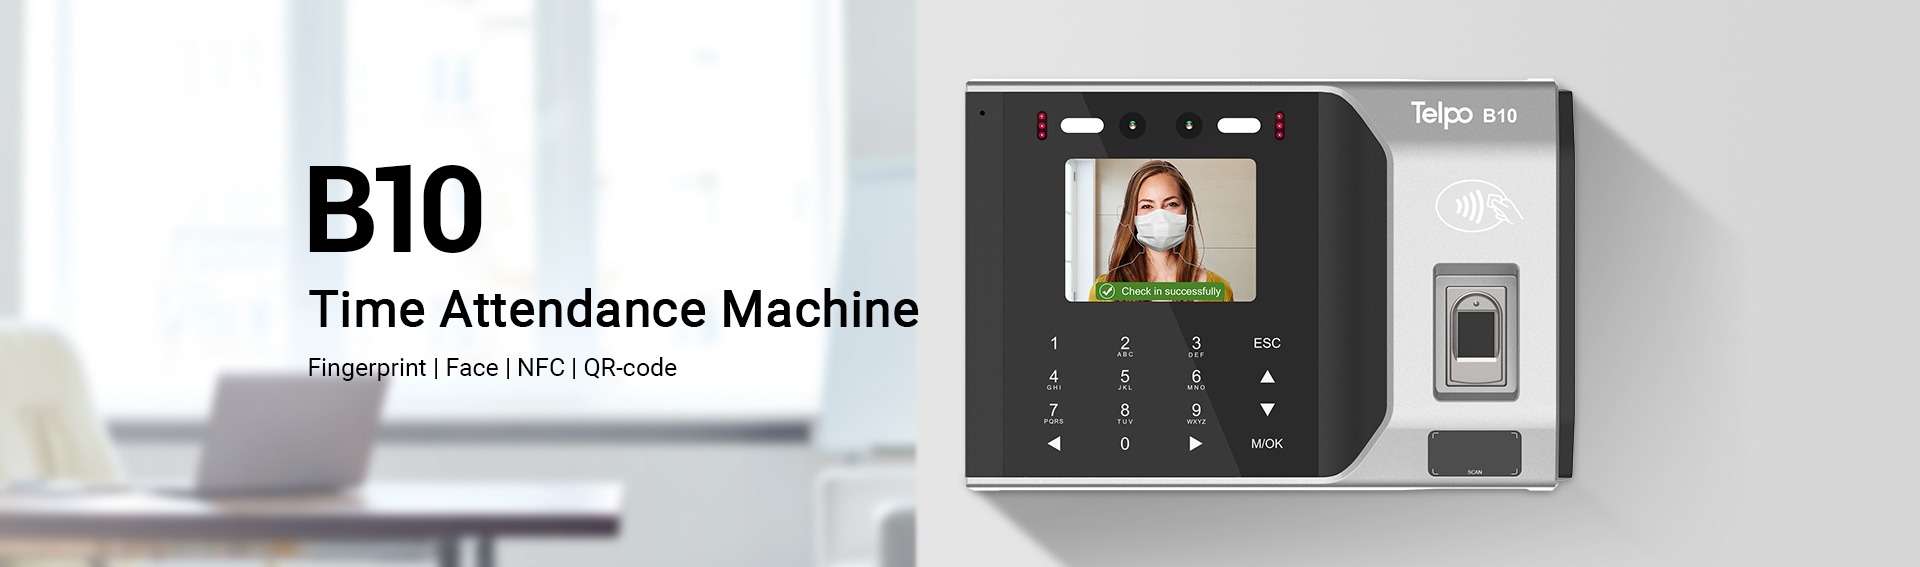 Time Attendance and Access Control Machine with Face recognition and Fingerprint reader